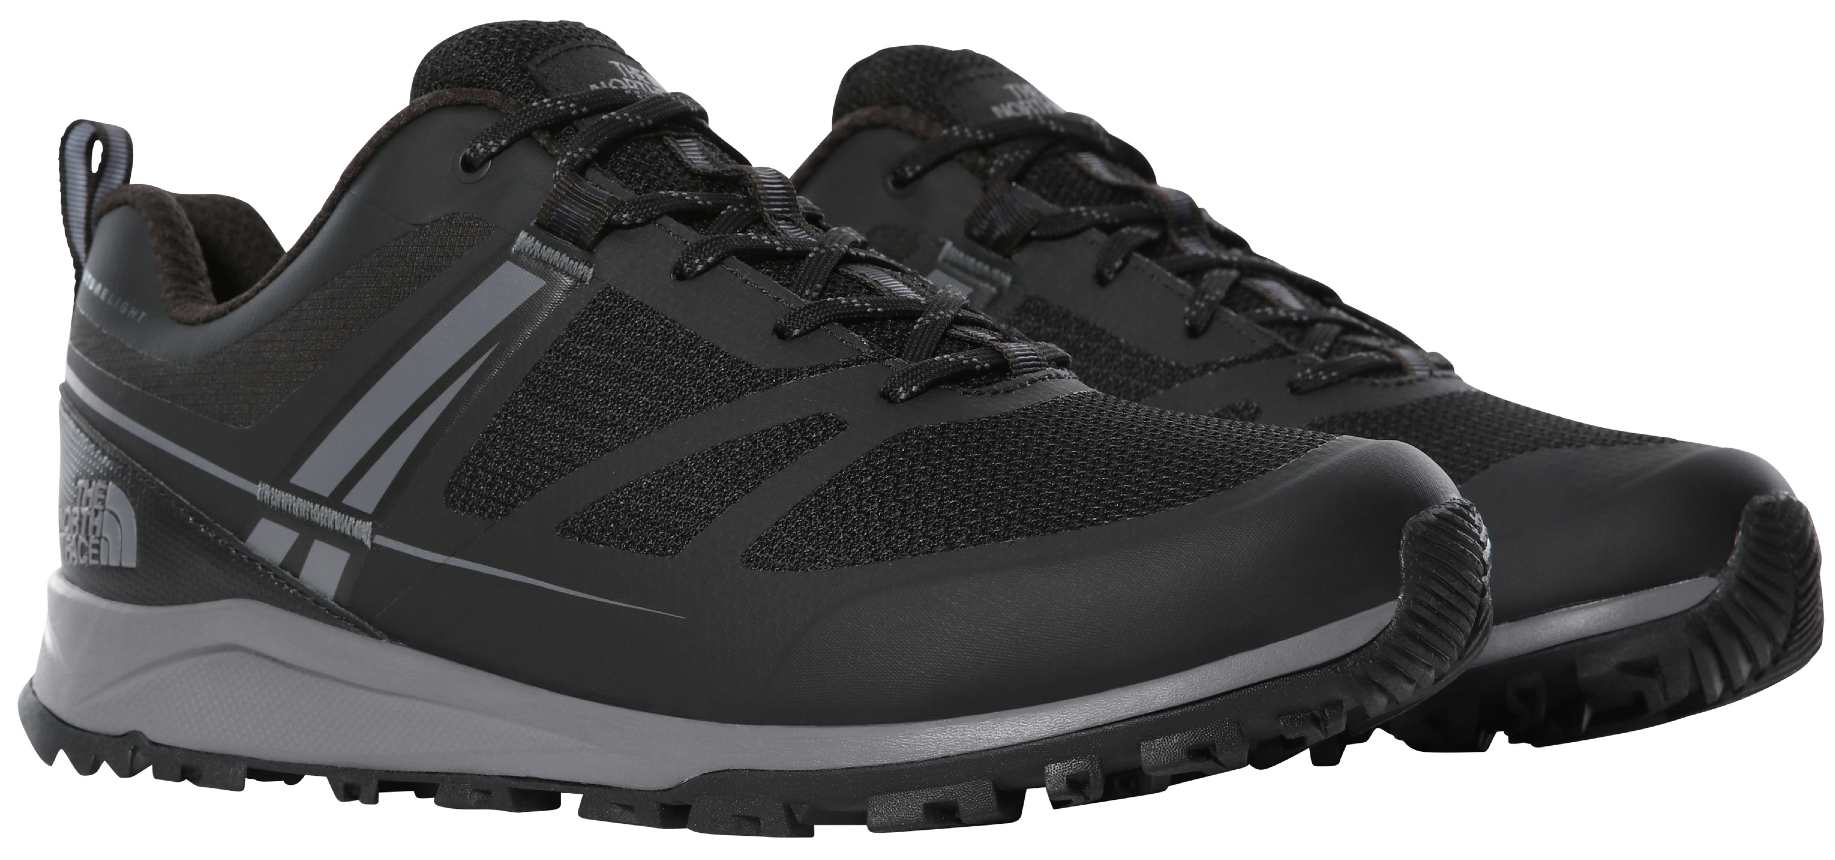 The North Face Litewave FutureLight Walking Shoes